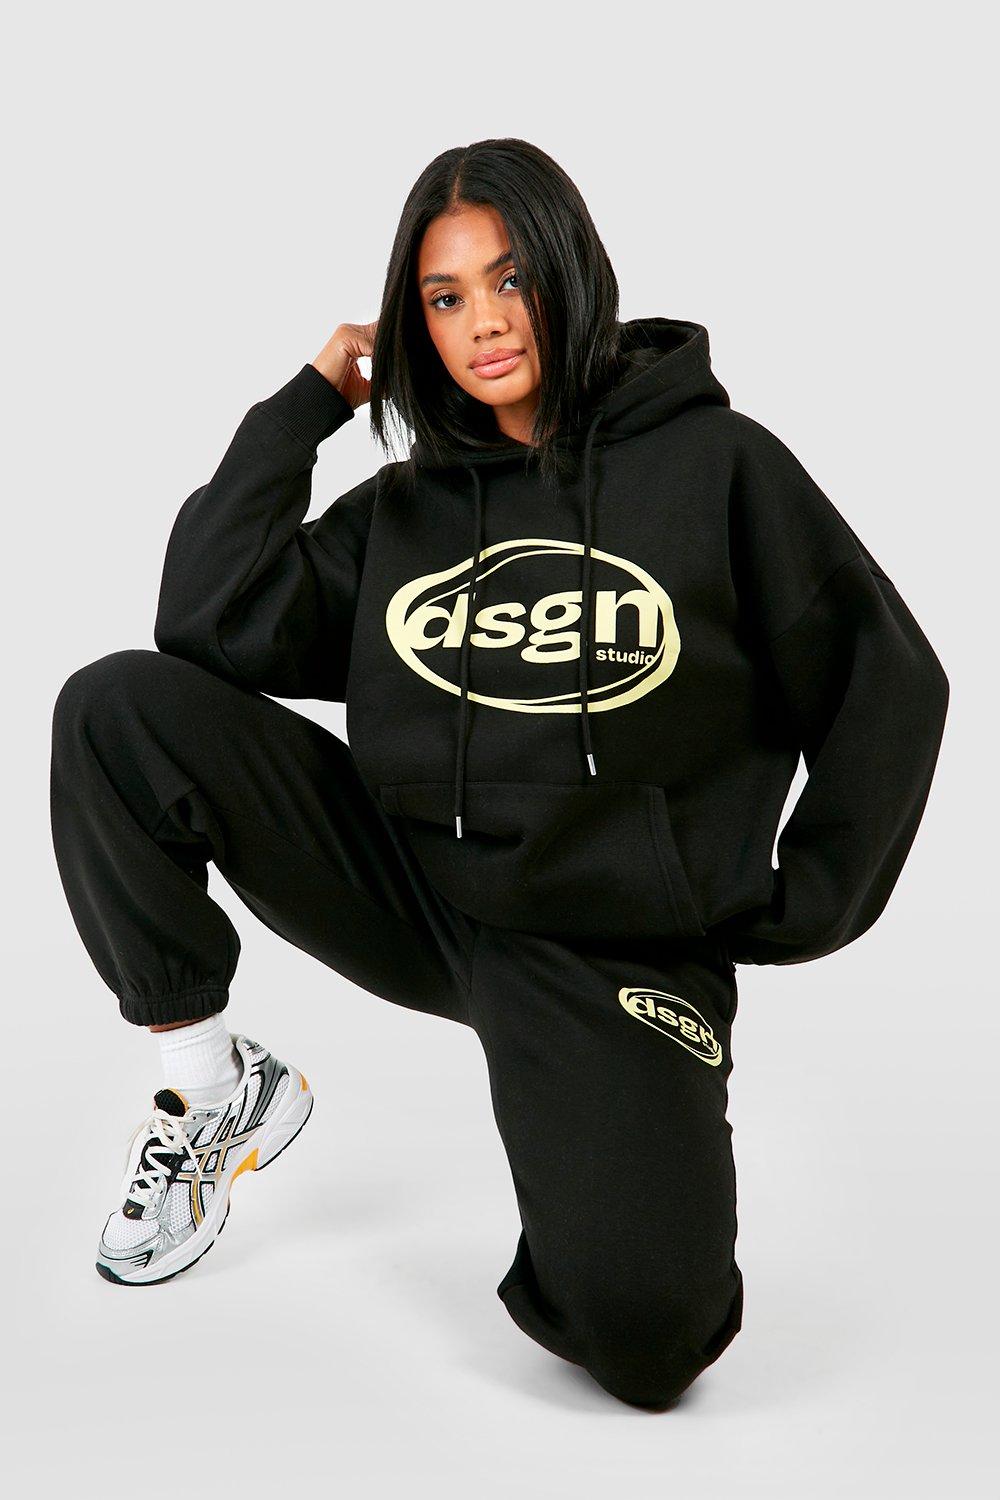 Womens Dsgn Studio Hoodie And Cuffed Jogger Tracksuit - Black - S, Black